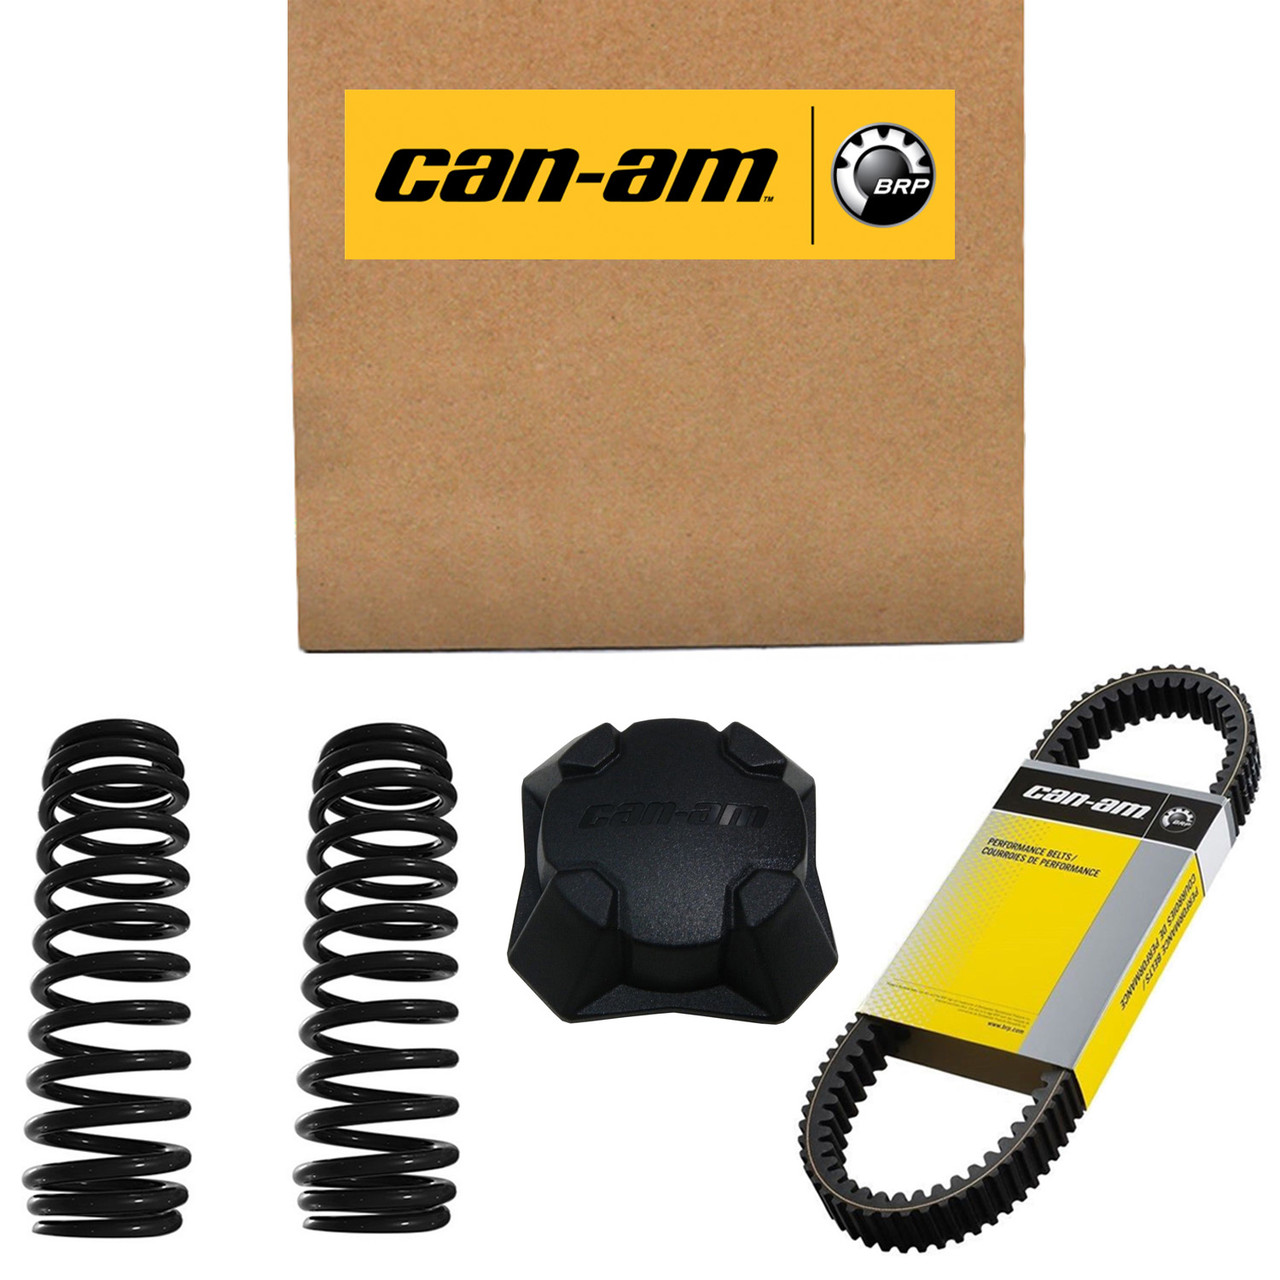 Can-Am New OEM Decal, 4X4 Cvt, 704907066